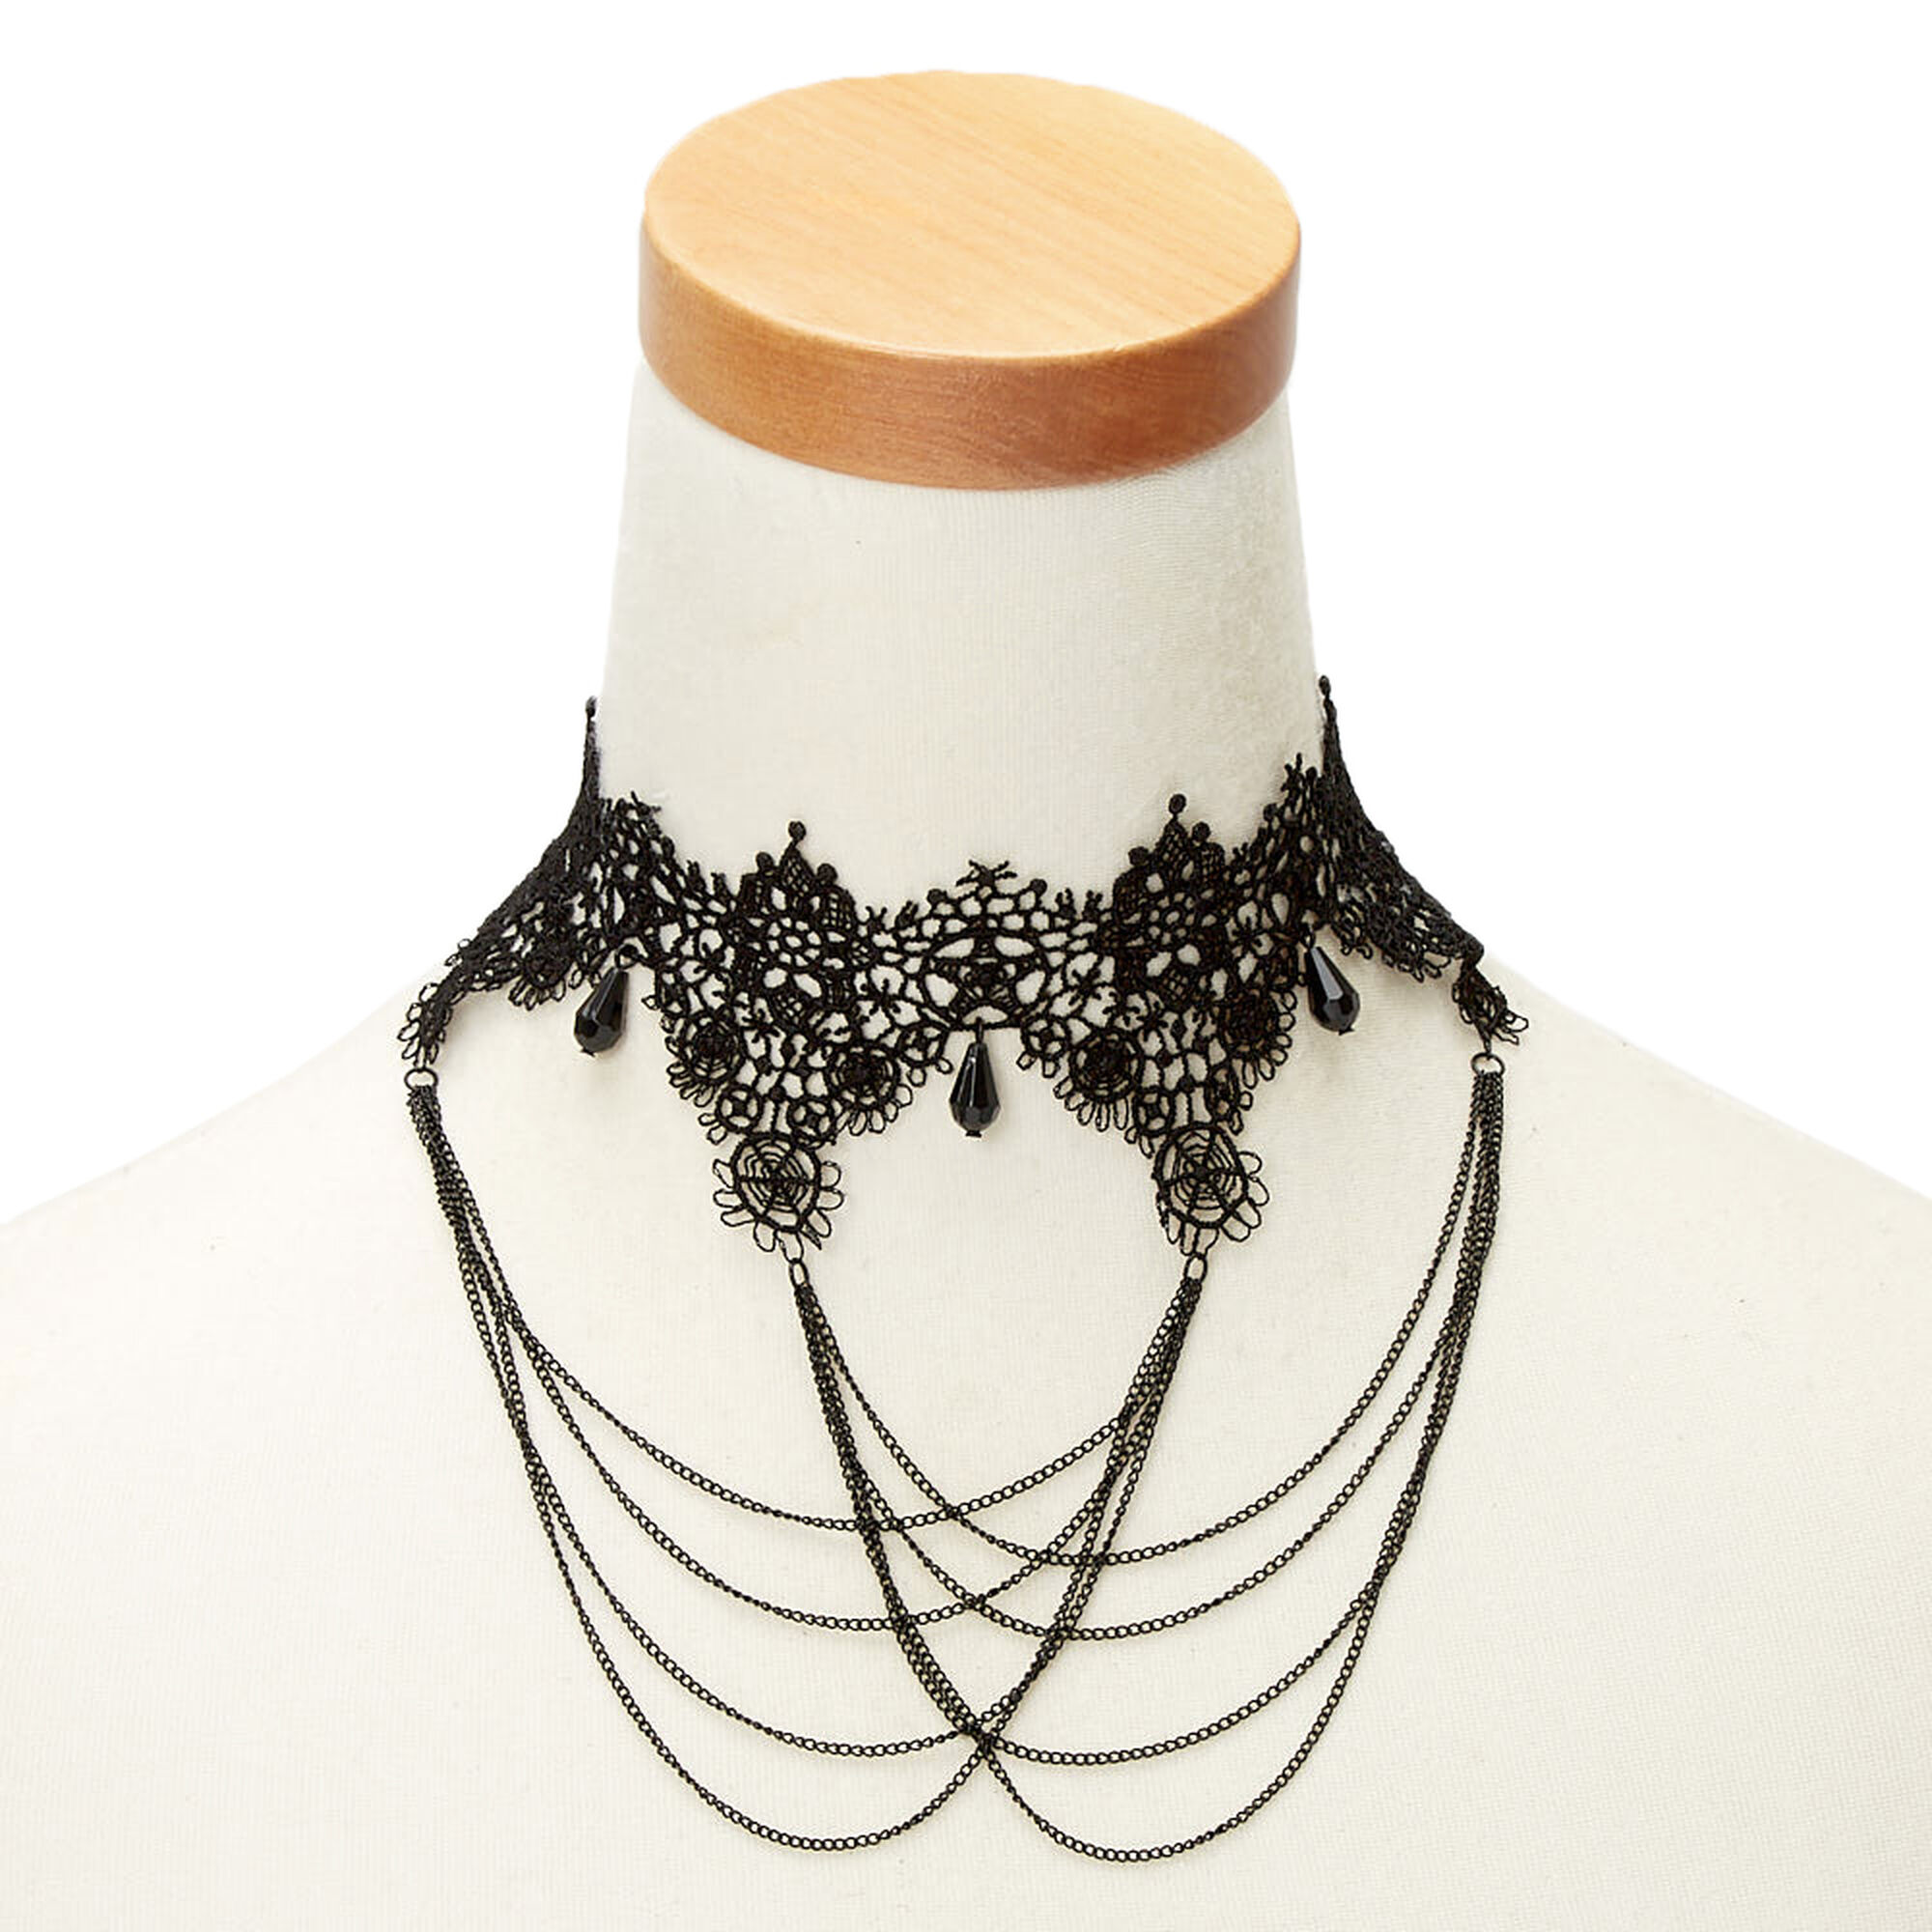 View Claires Lace Swag Choker Necklace Black information